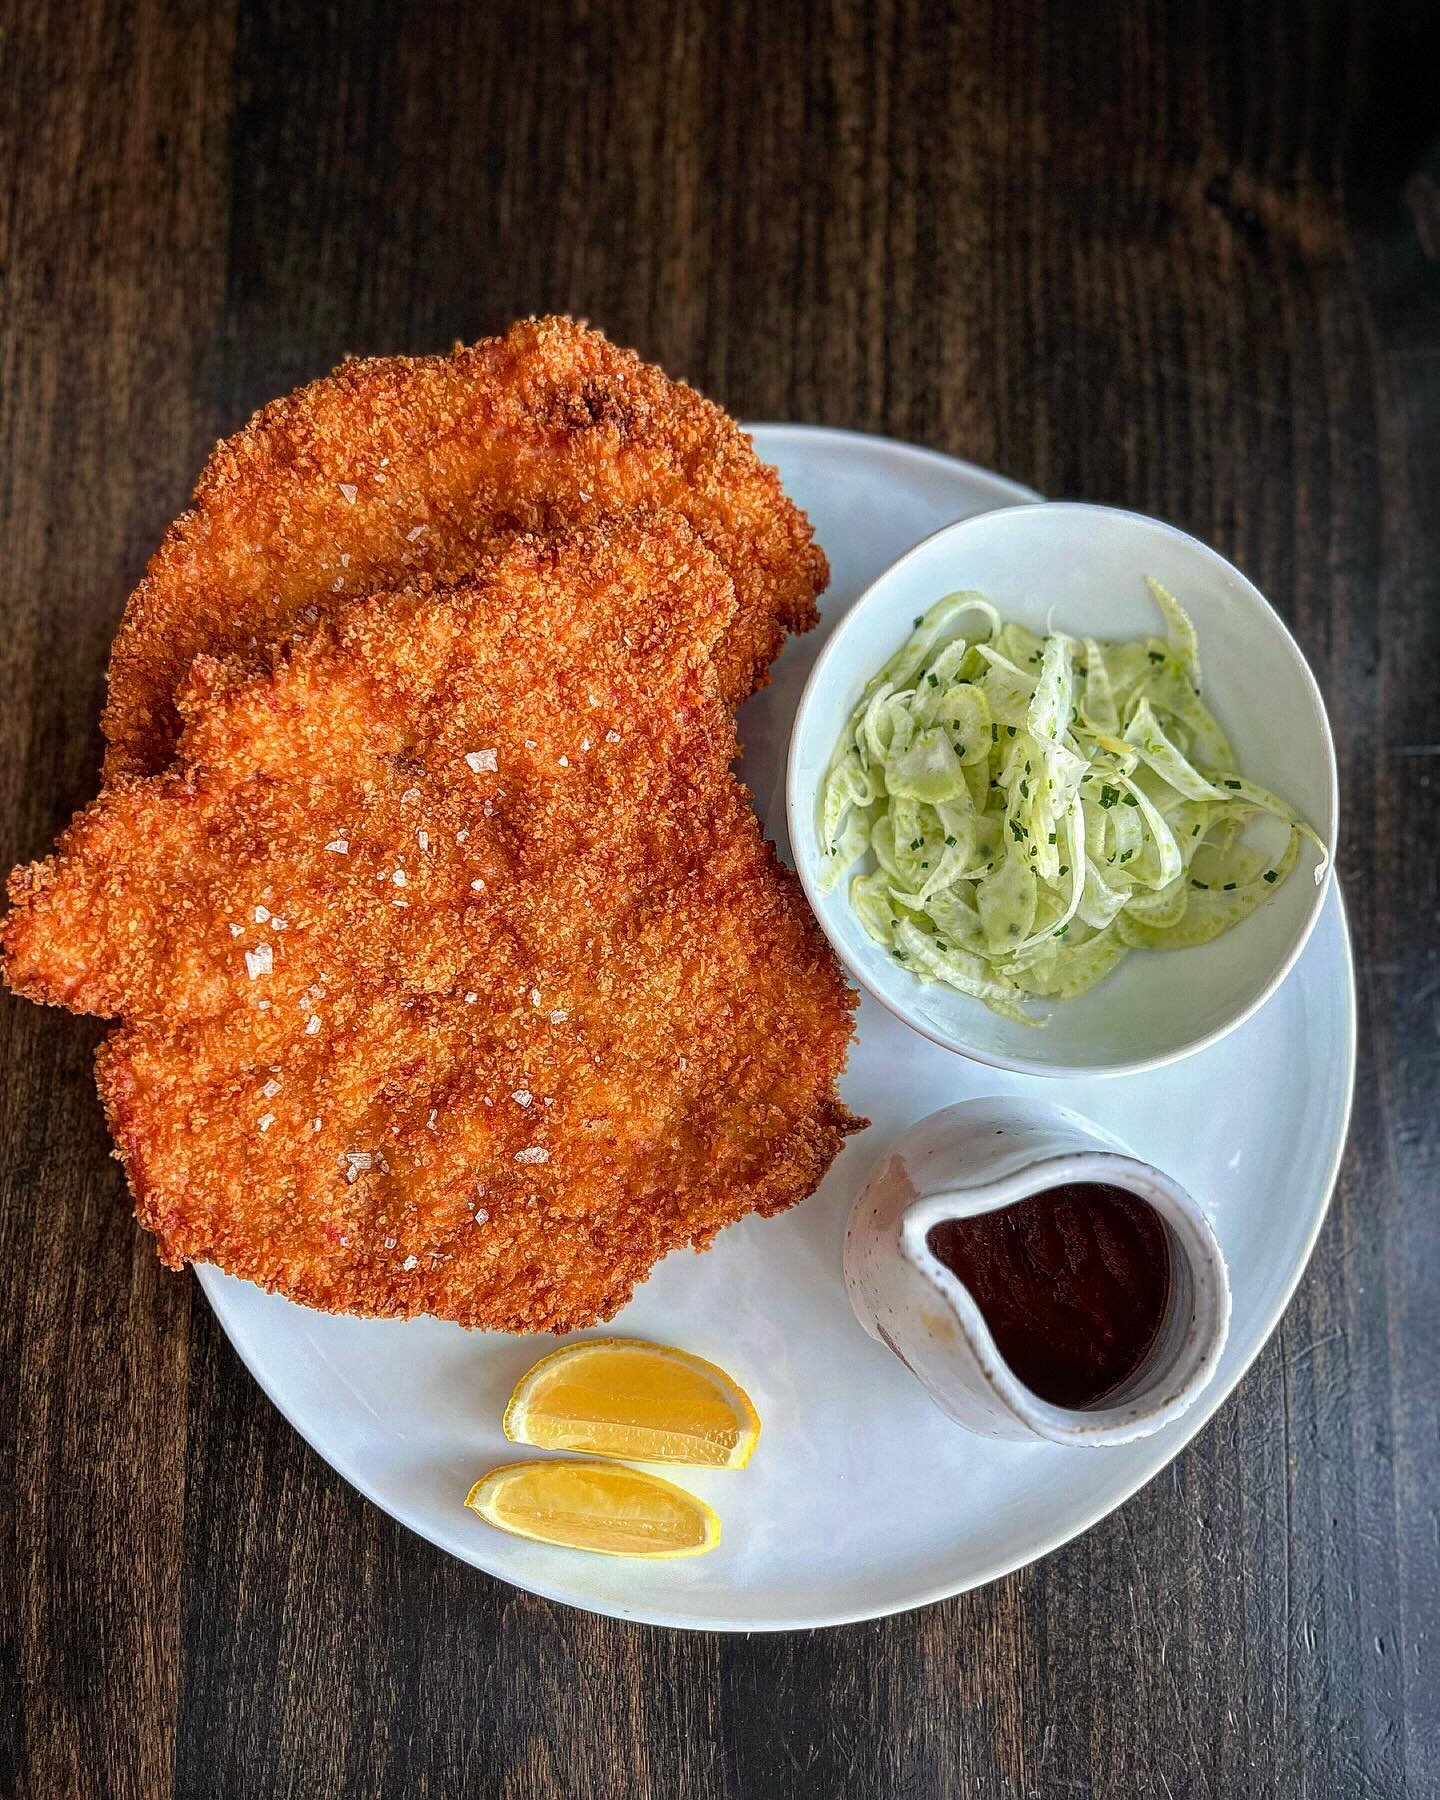 Y&rsquo;all aren&rsquo;t allowed to ask how long this is going to be on the menu&hellip; 😝 because I have no idea!

So let&rsquo;s just appreciate the time we have with her&hellip; pork schnitzel! With adobo vinaigrette and a simple bright fennel sa